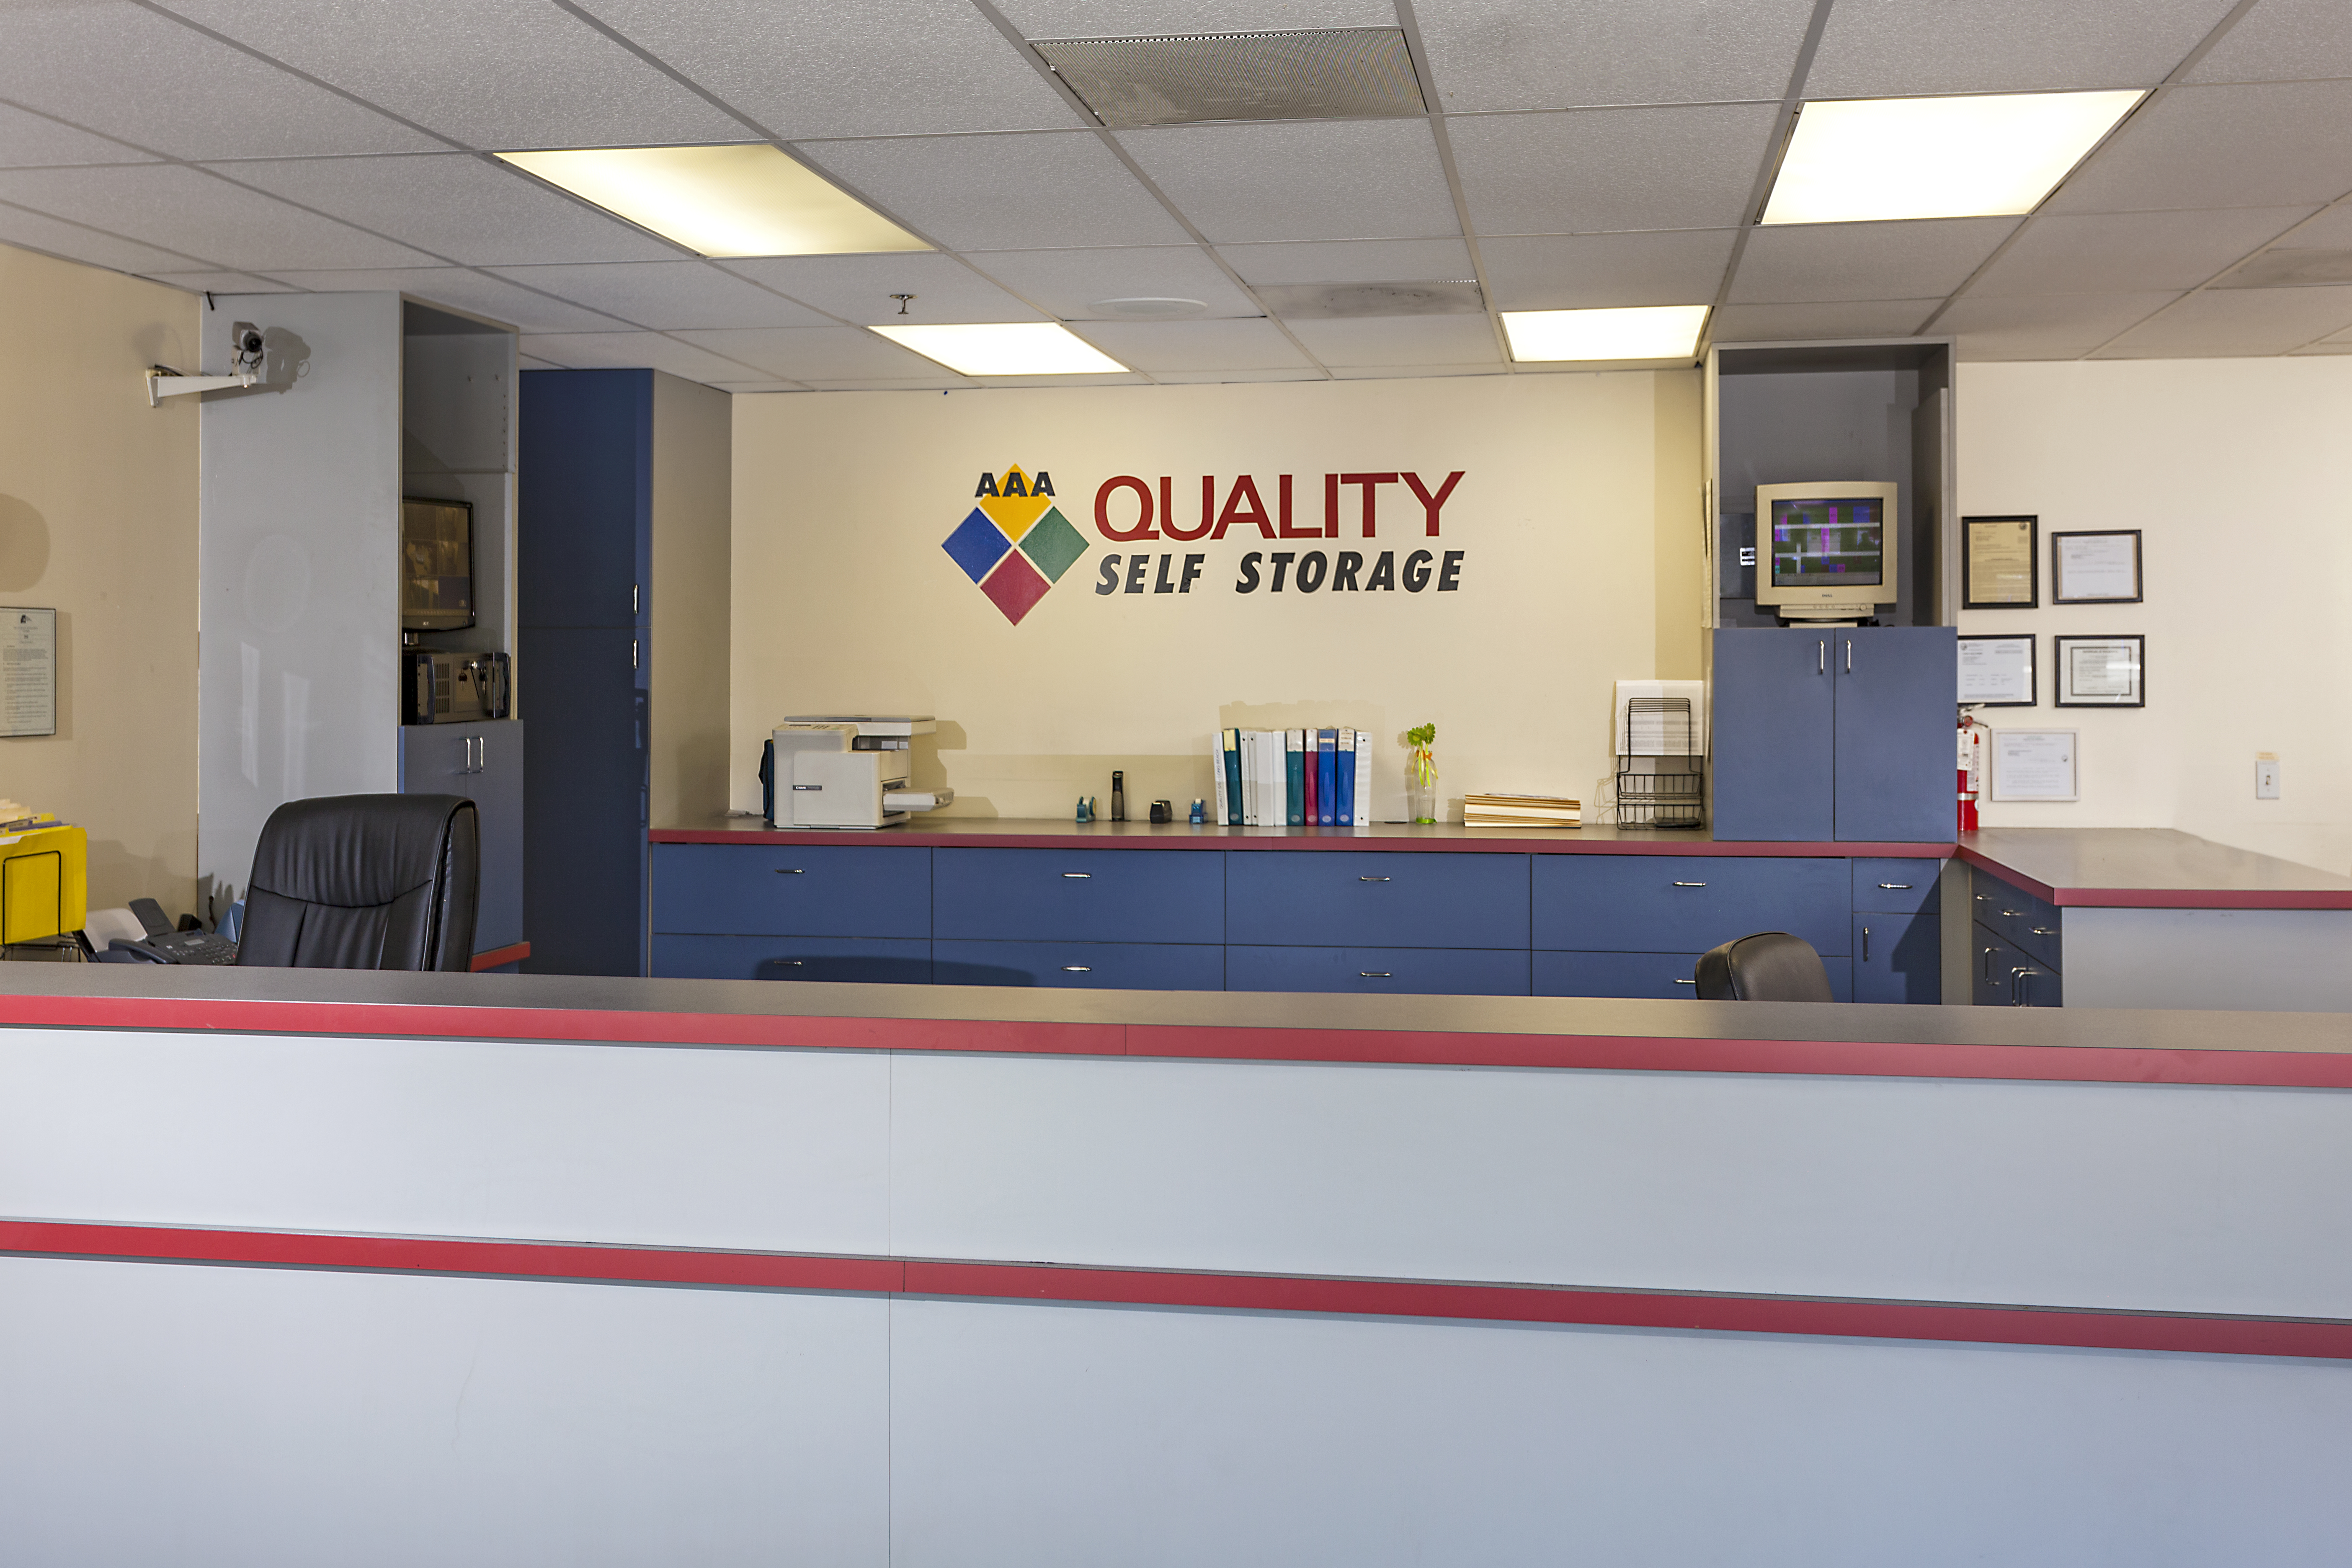 Rental Office for AAA Quality Self Storage - Long Beach